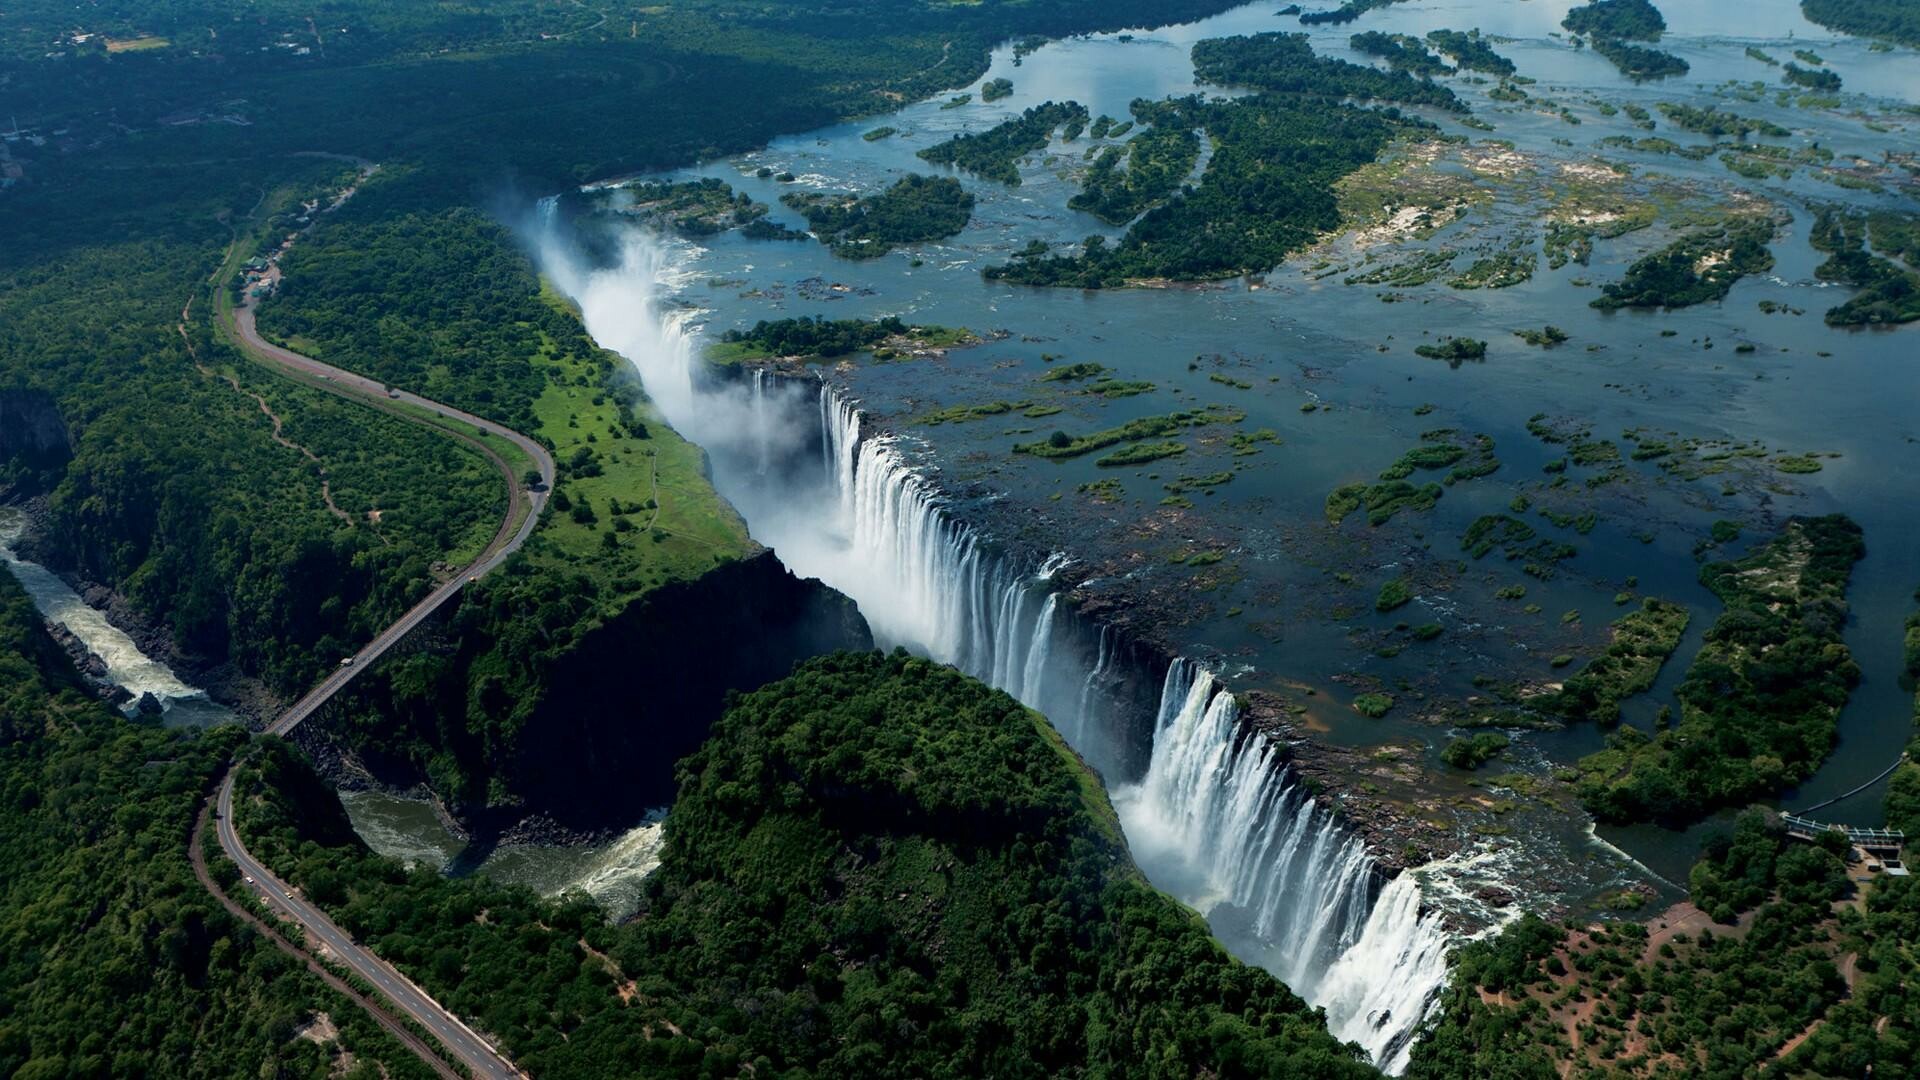 Victoria Falls: A UNESCO Heritage Site, The largest single sheet of flowing water in the world. 1920x1080 Full HD Wallpaper.